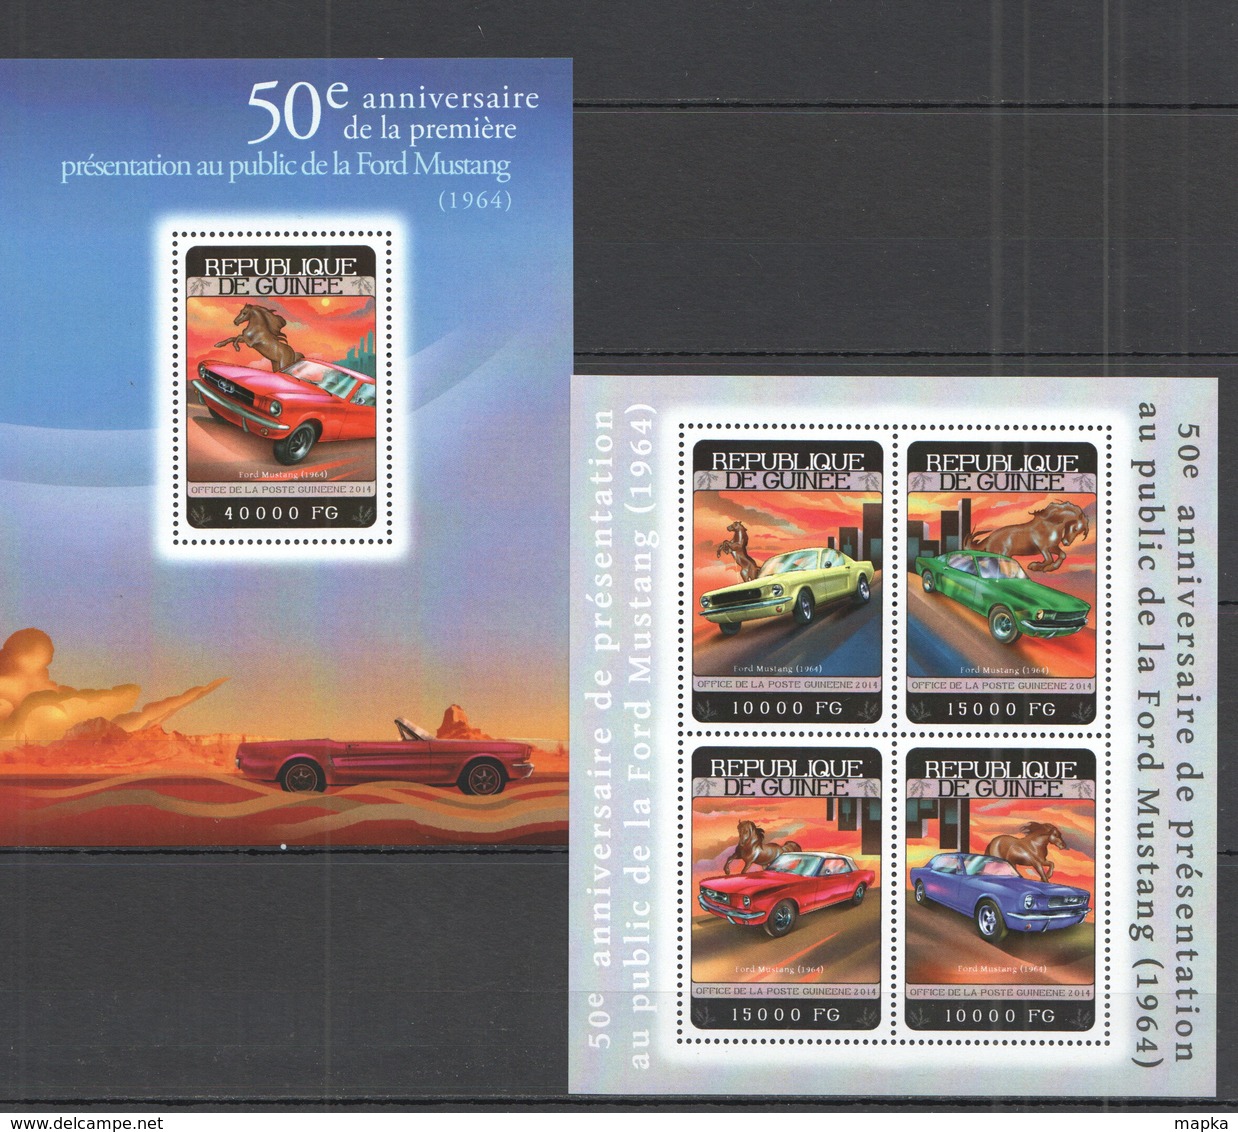 ST789 2014 GUINEE GUINEA TRANSPORT CARS ANNVERSARY 1ST PRESENTATION FORD MUSTANG KB+BL MNH - Automobili